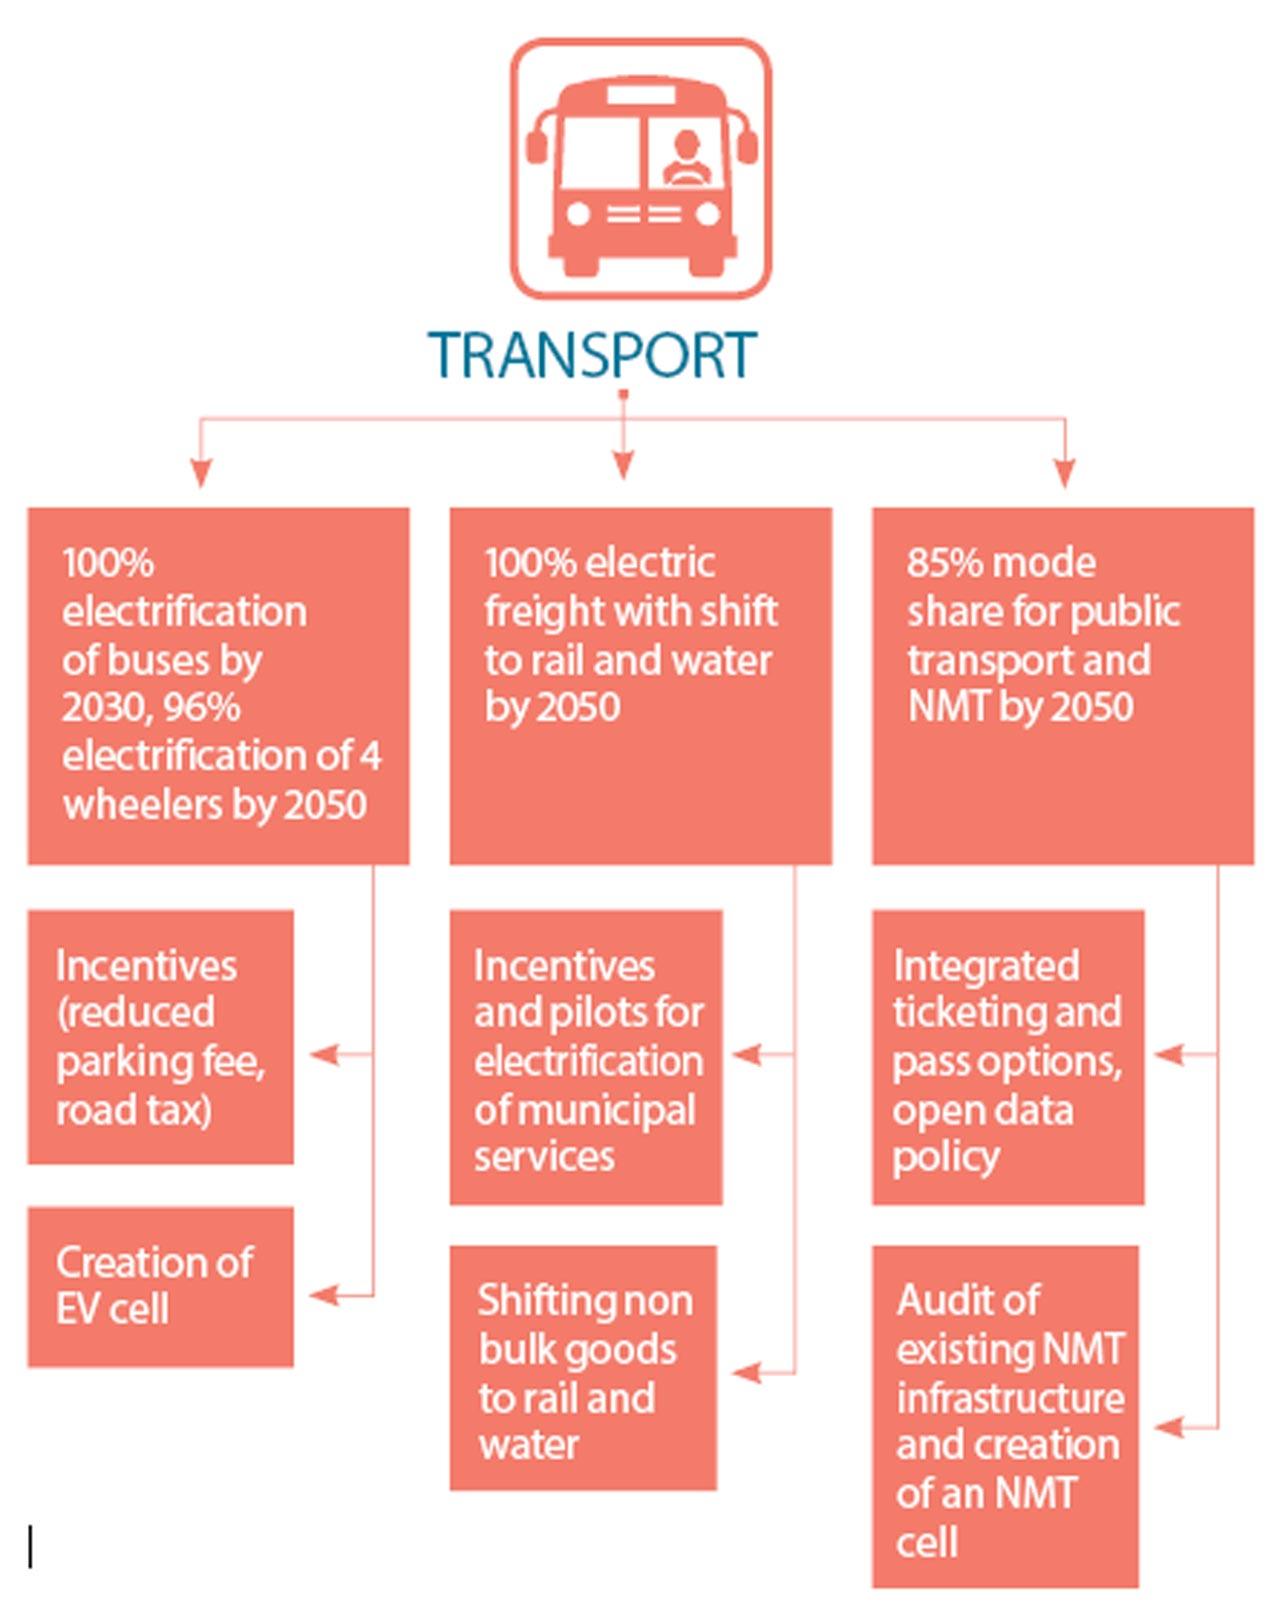  Strategies planned in the transport sector. Courtesy/Mumbai Climate Action Plan 2022